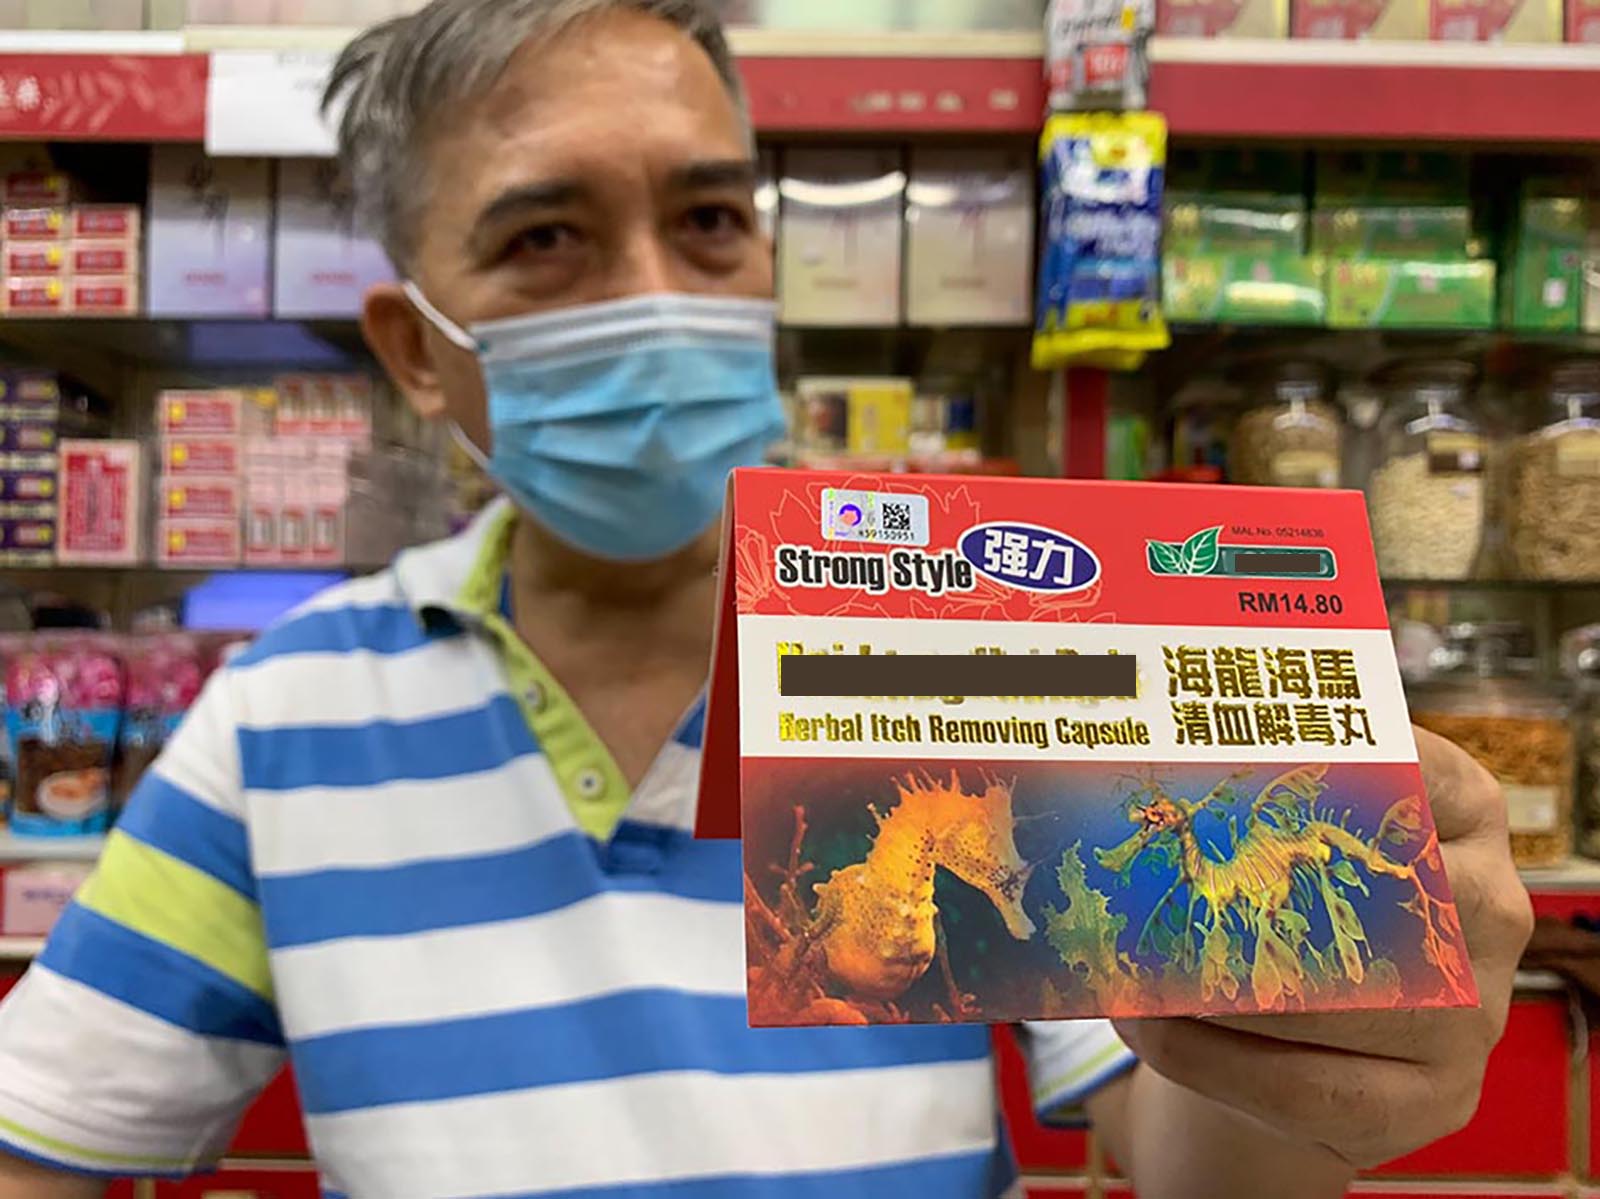  a masked man holds up traditional chinese medicine which uses seahorse as an ingredient.